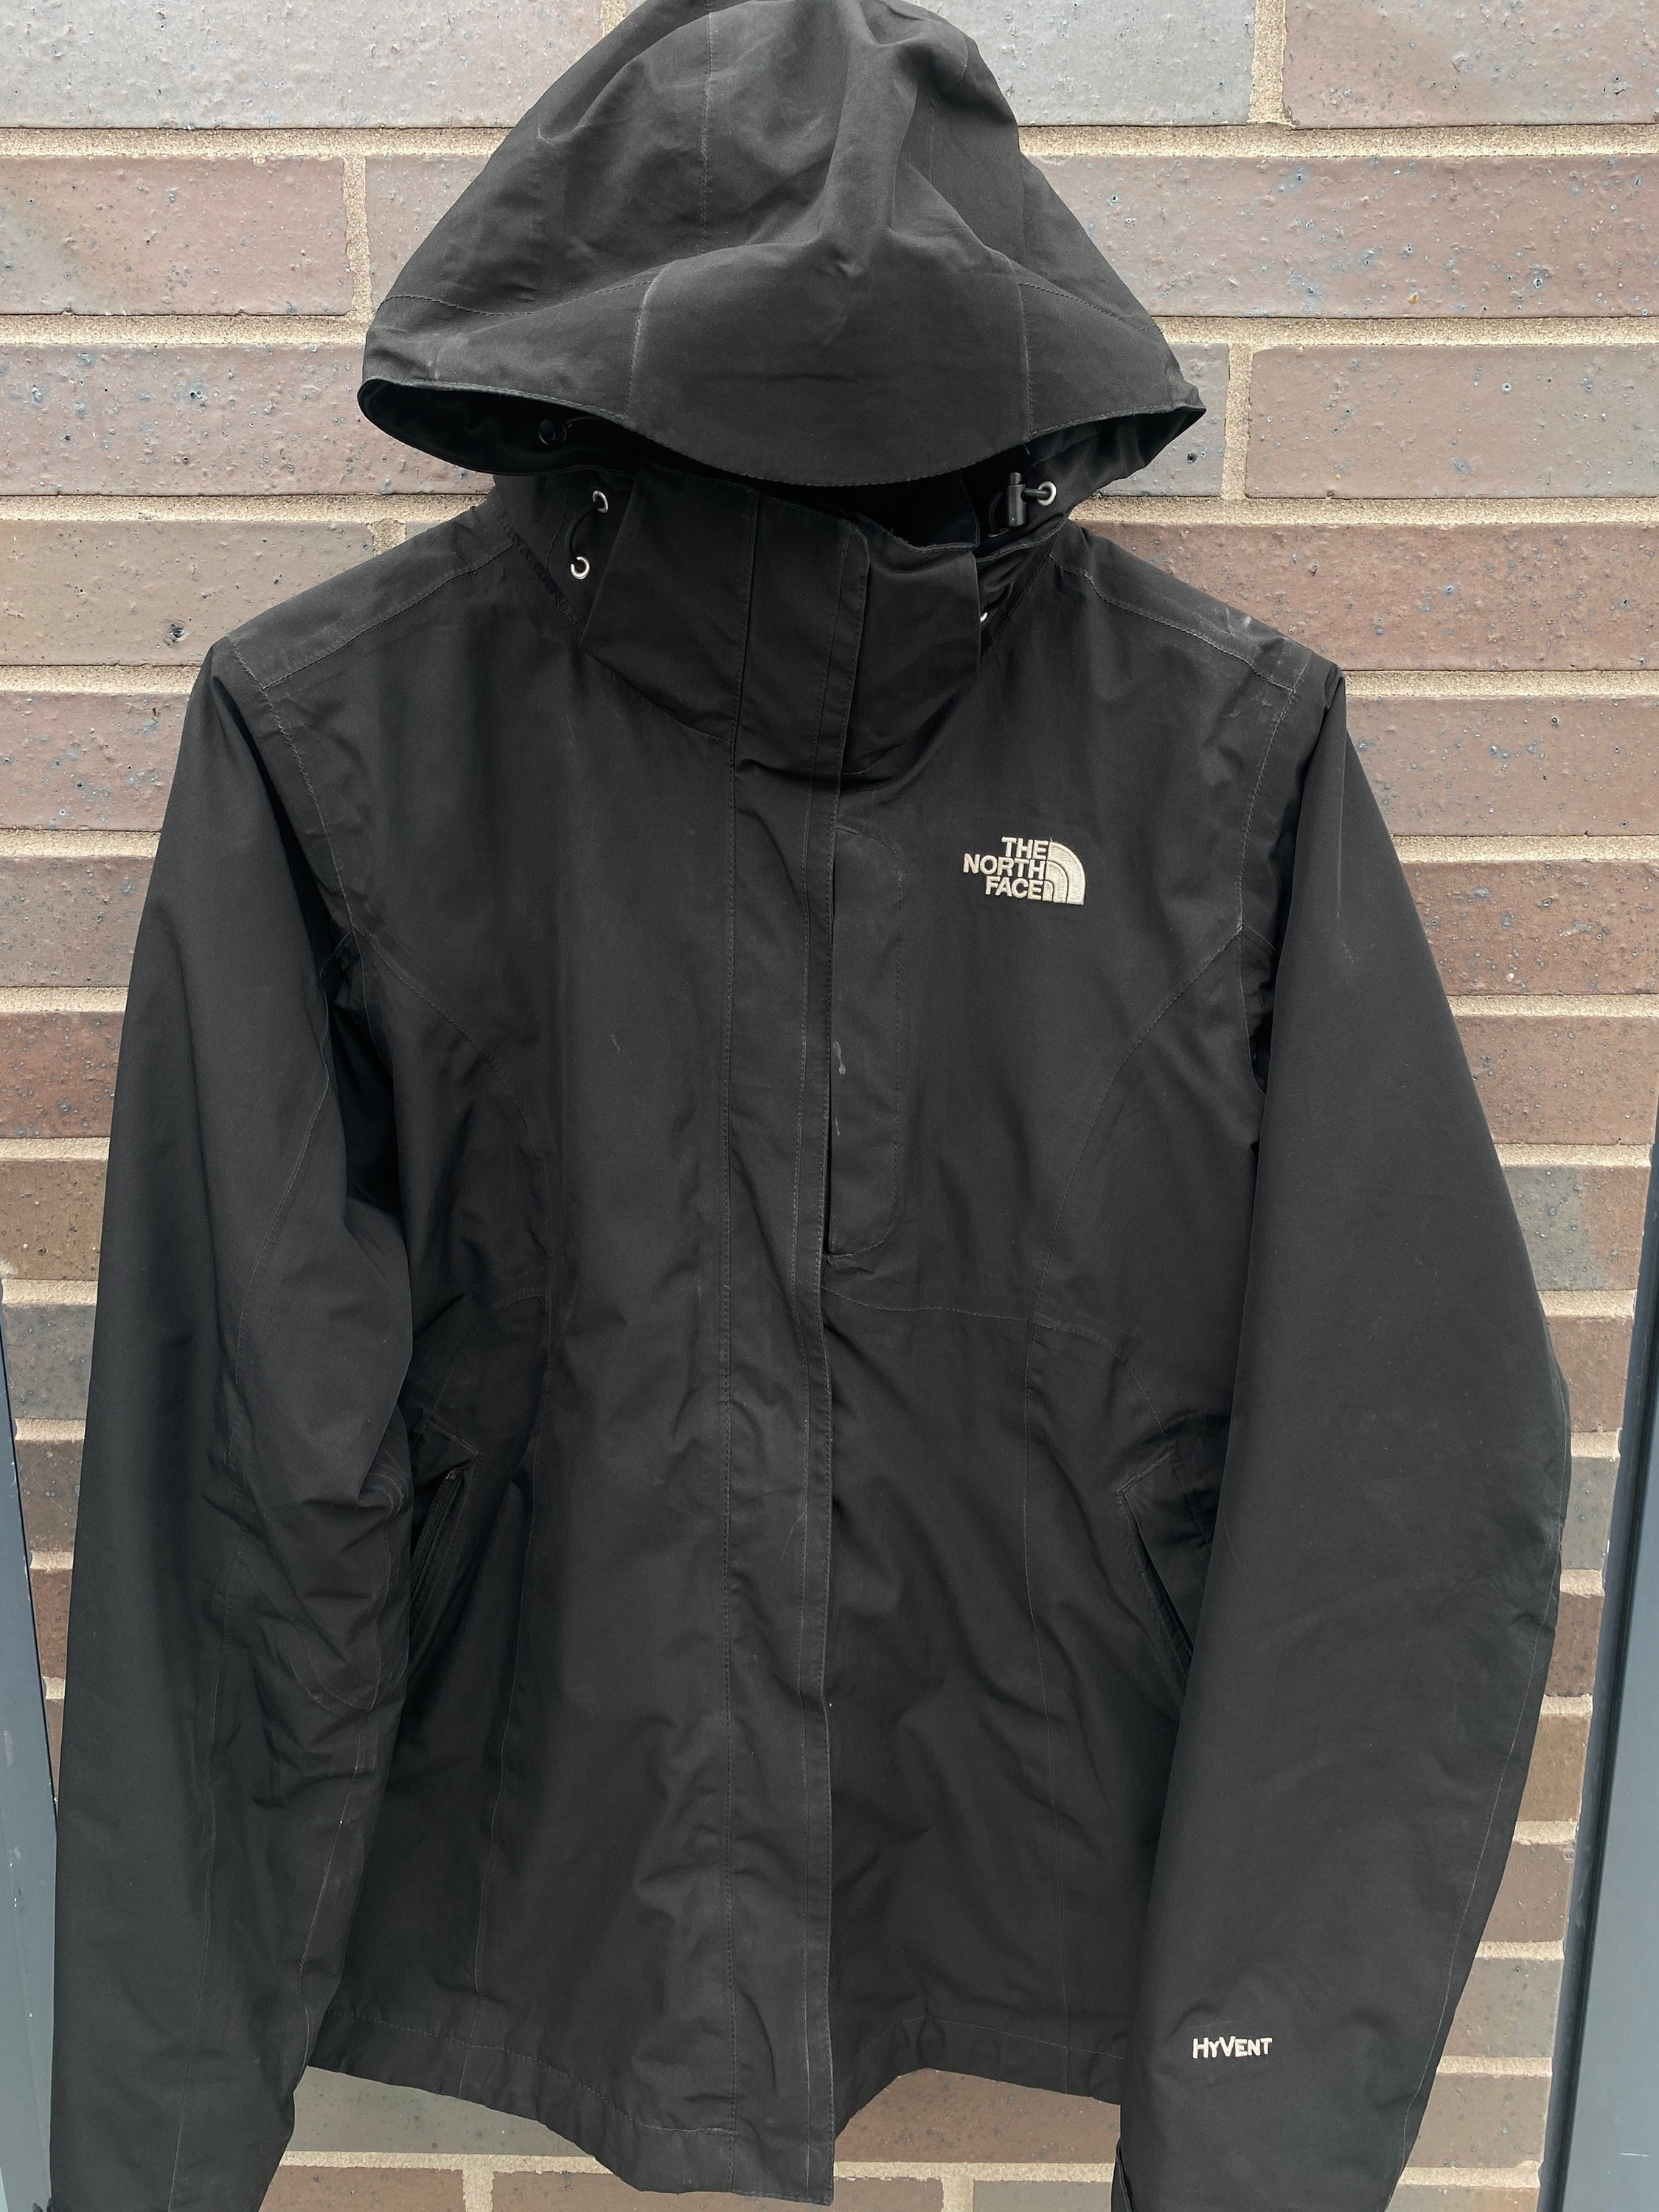 Vintage 90s the North Face Hyvent Jacket / Winter Coat